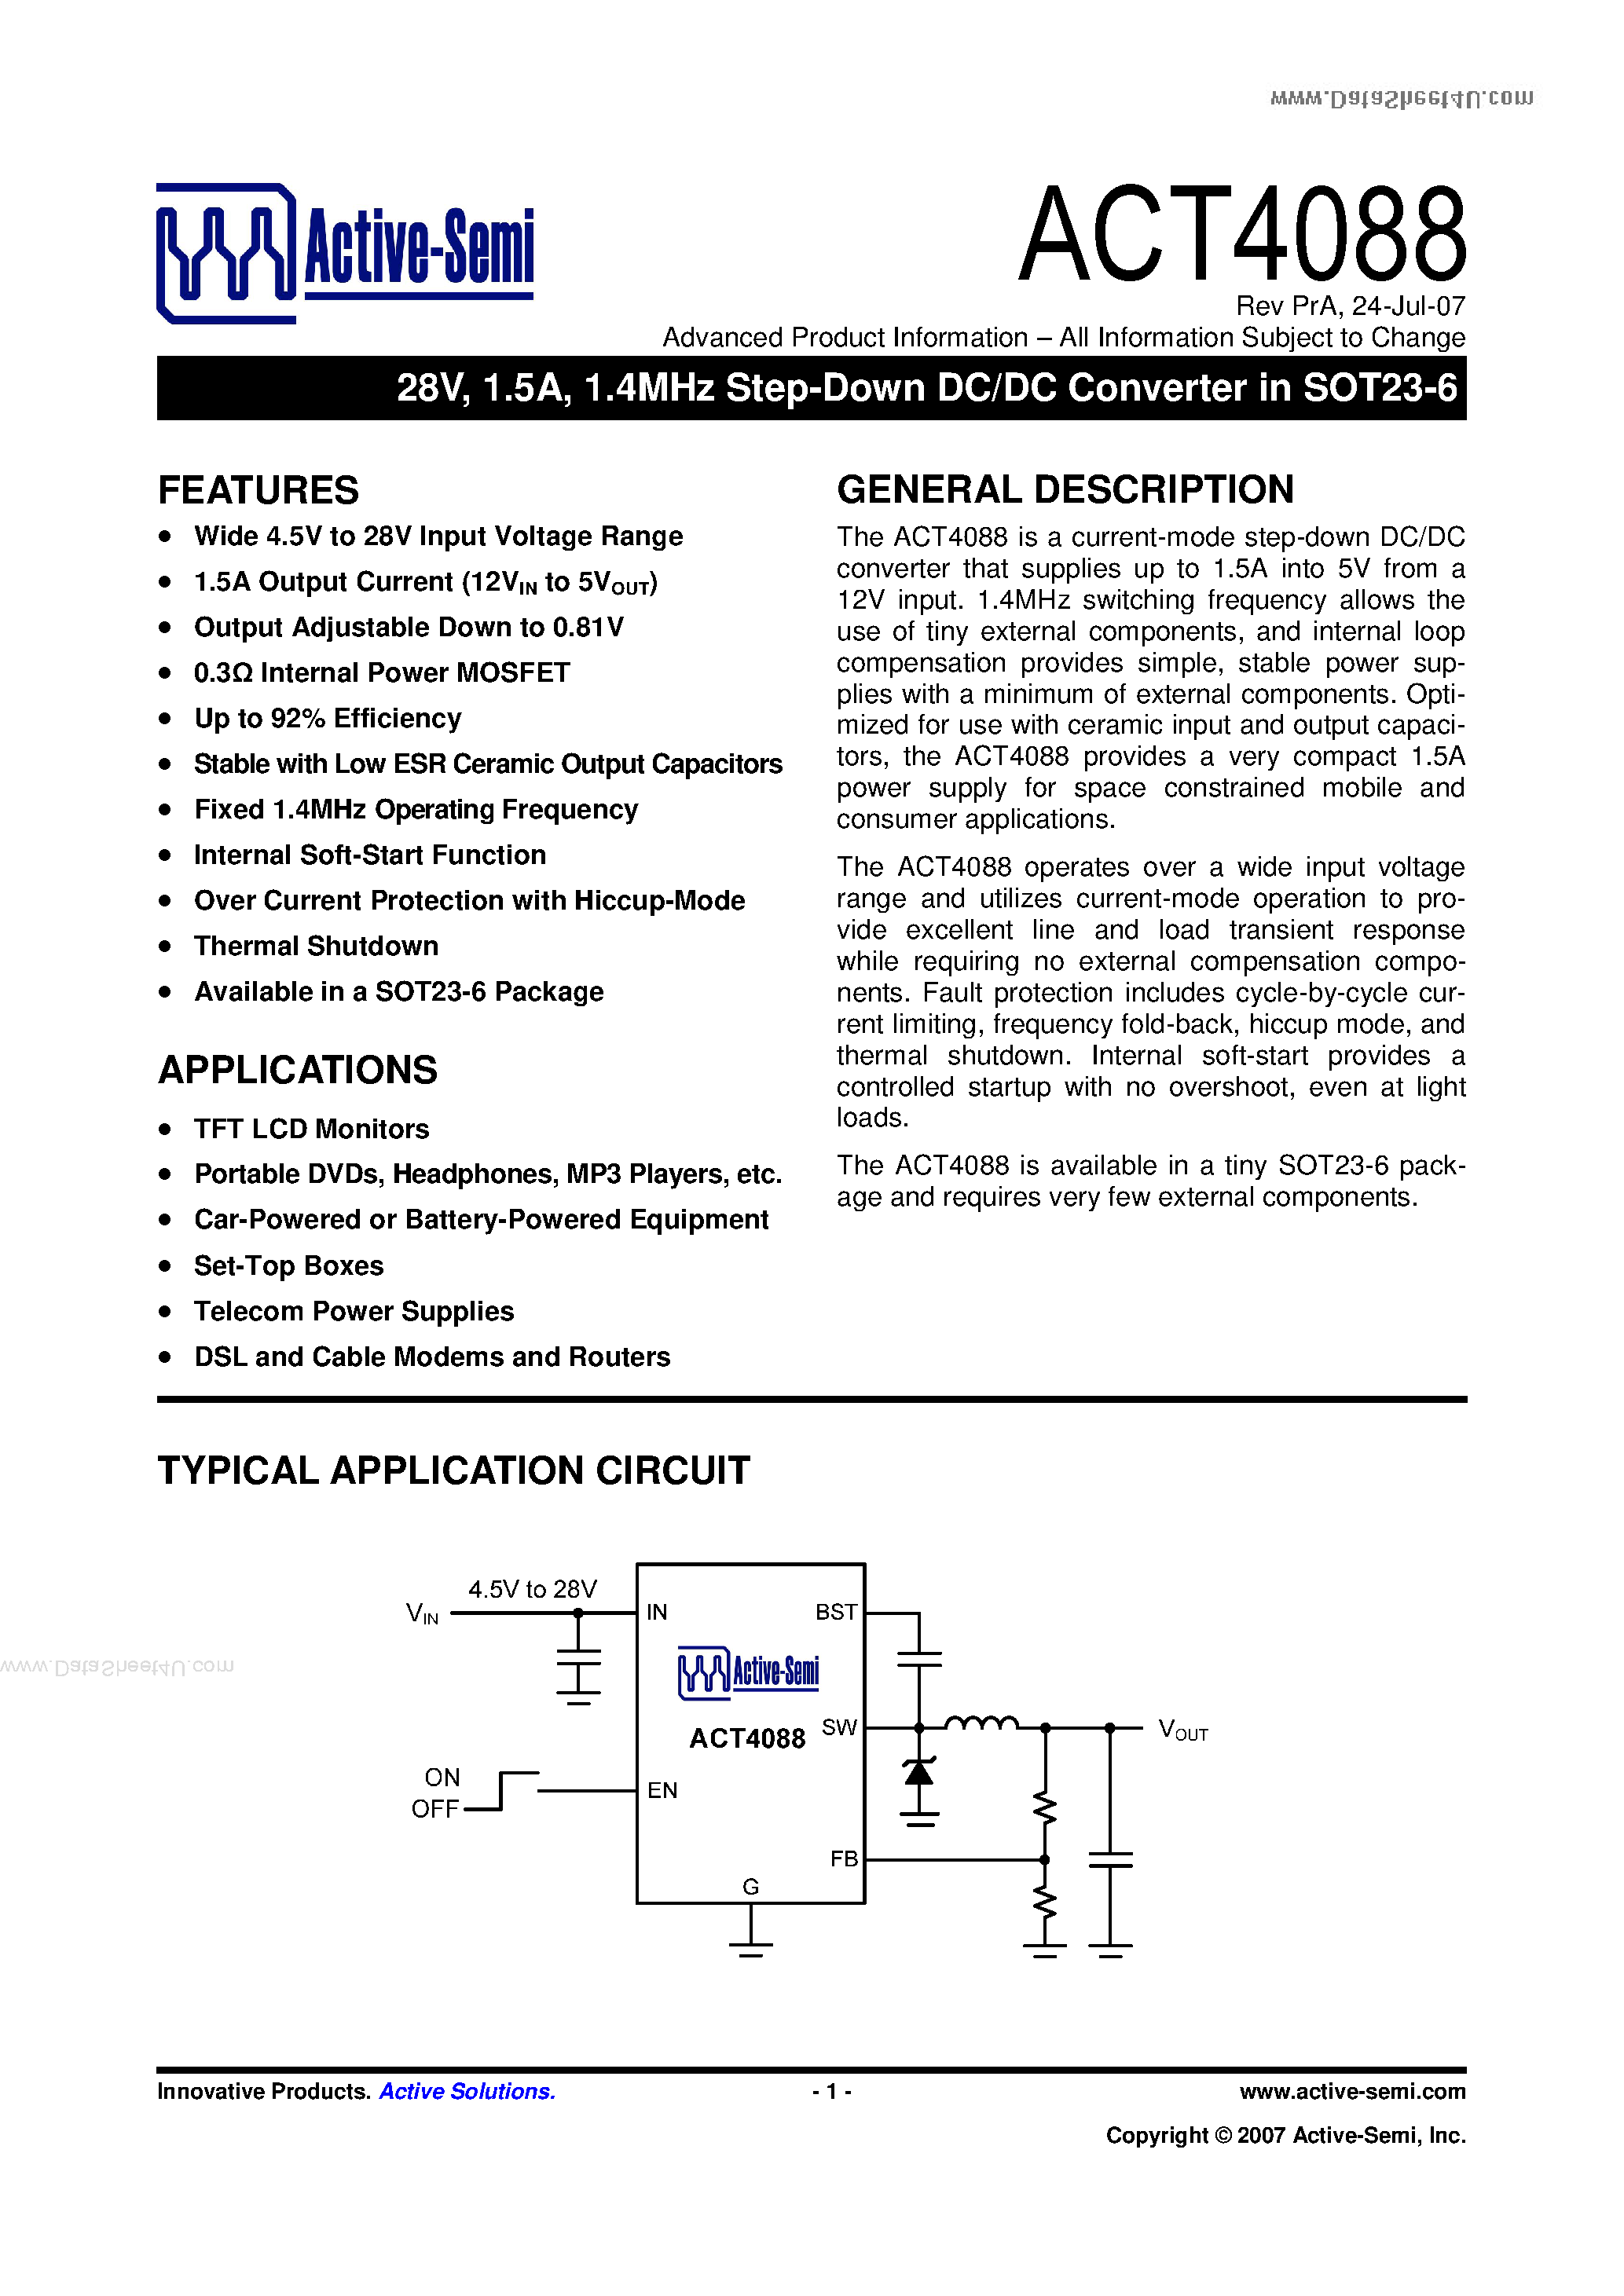 Datasheet ACT4088 - 1.4MHz Step-Down DC/DC Converter page 1